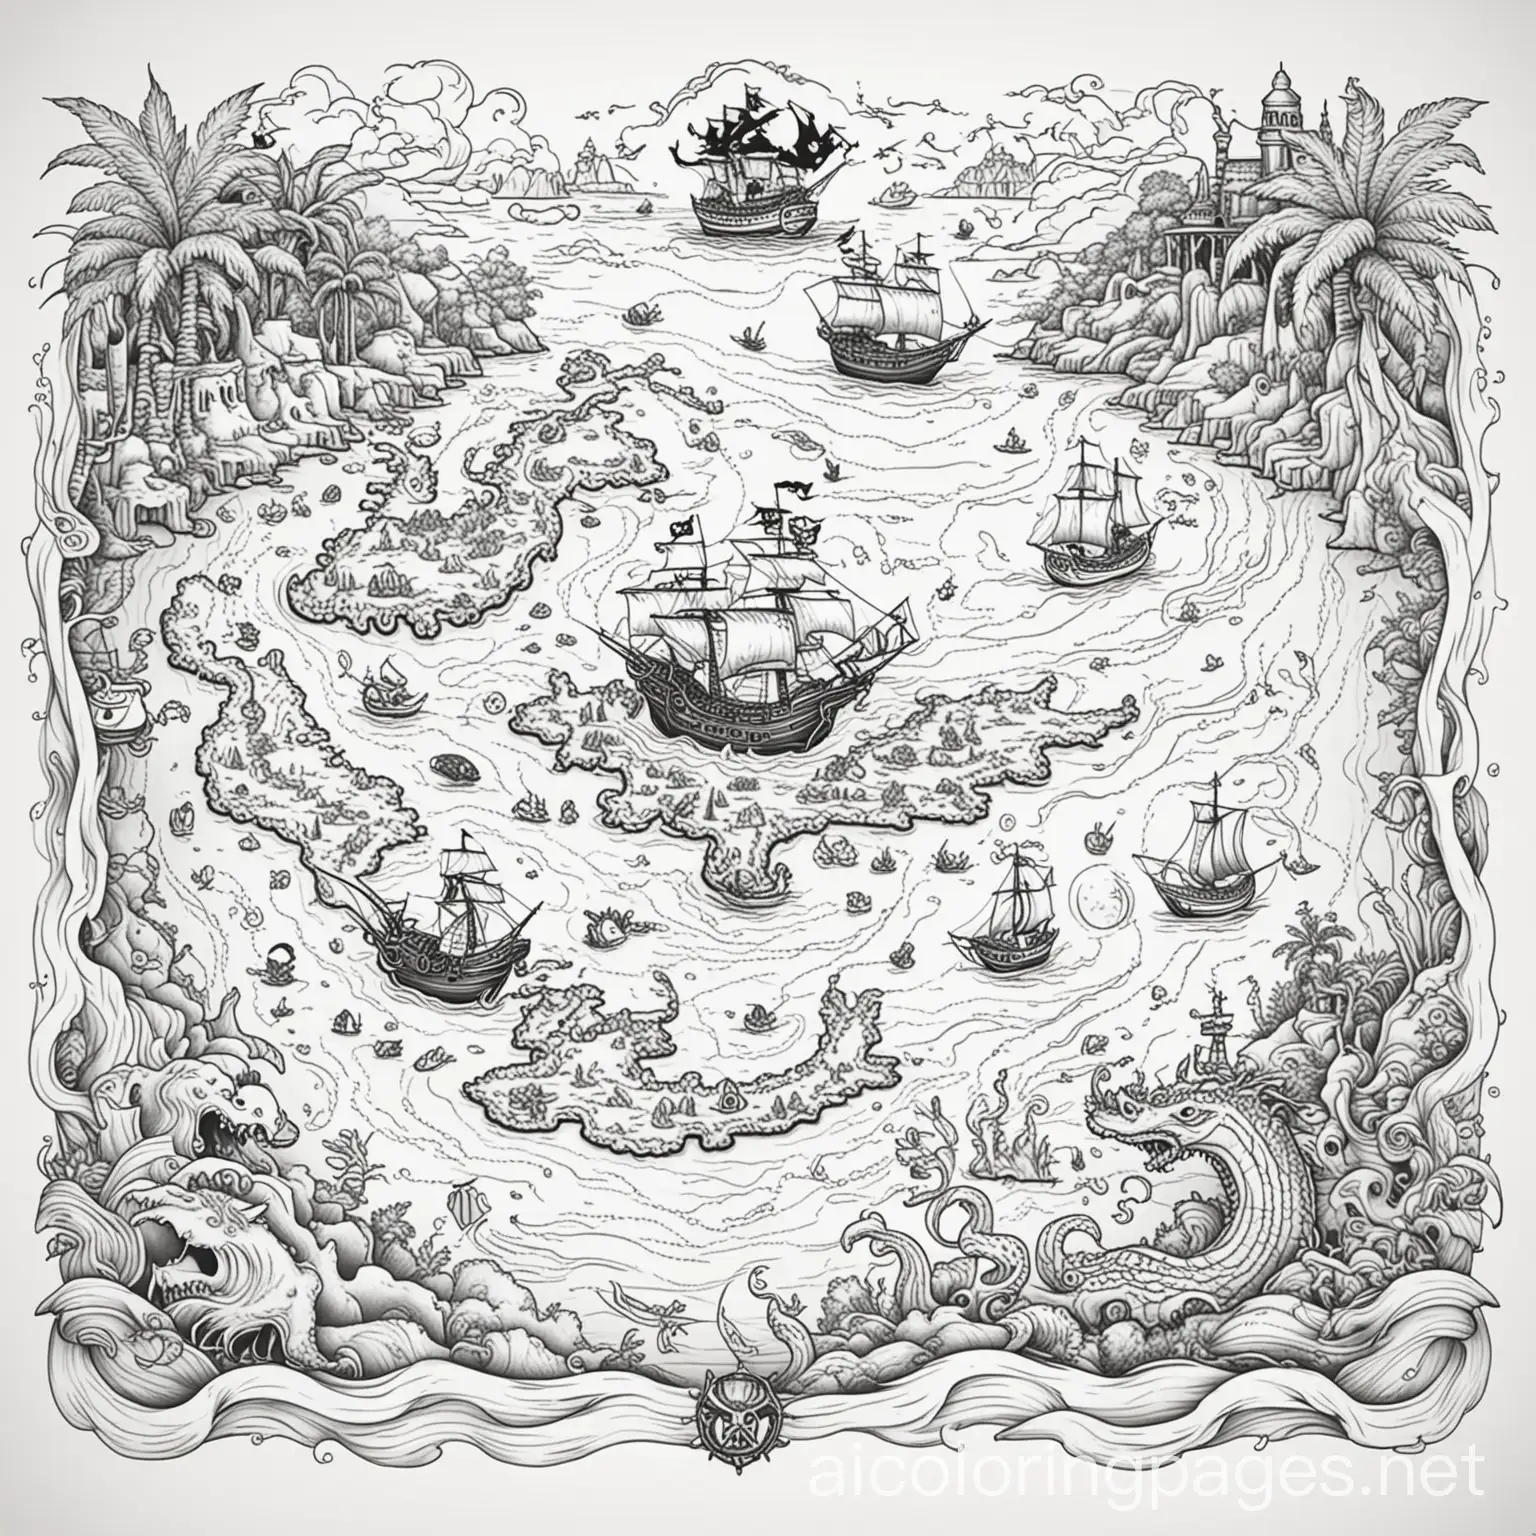 Pirate-Map-Coloring-Page-with-Sea-Monster-Line-Art-on-White-Background